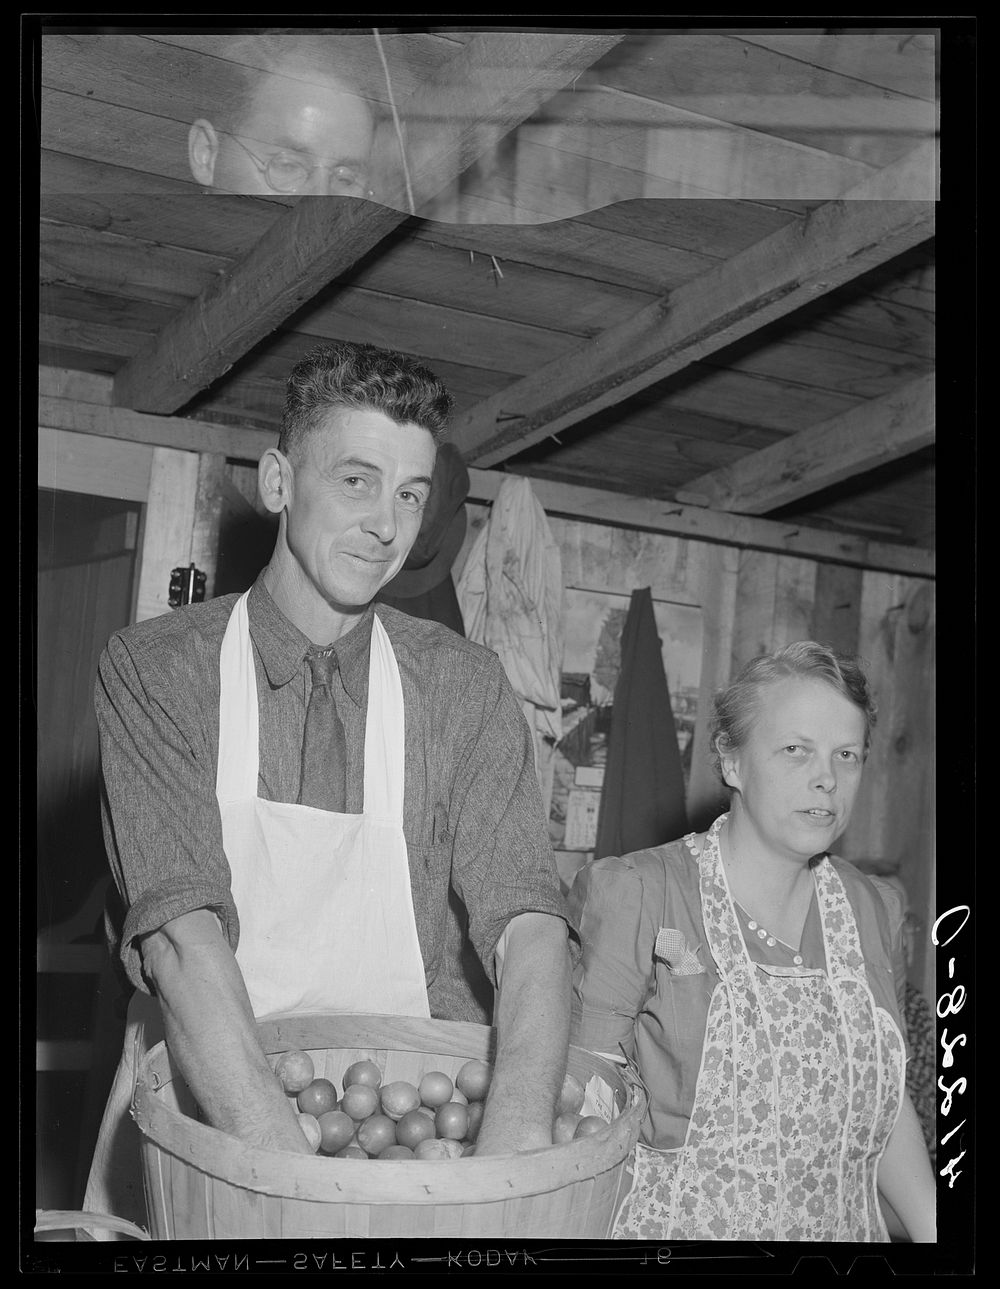 [Untitled photo, possibly related to: Mr. Cooper, member of board of directors of the Tri-County Farmers Co-op Market at Du…